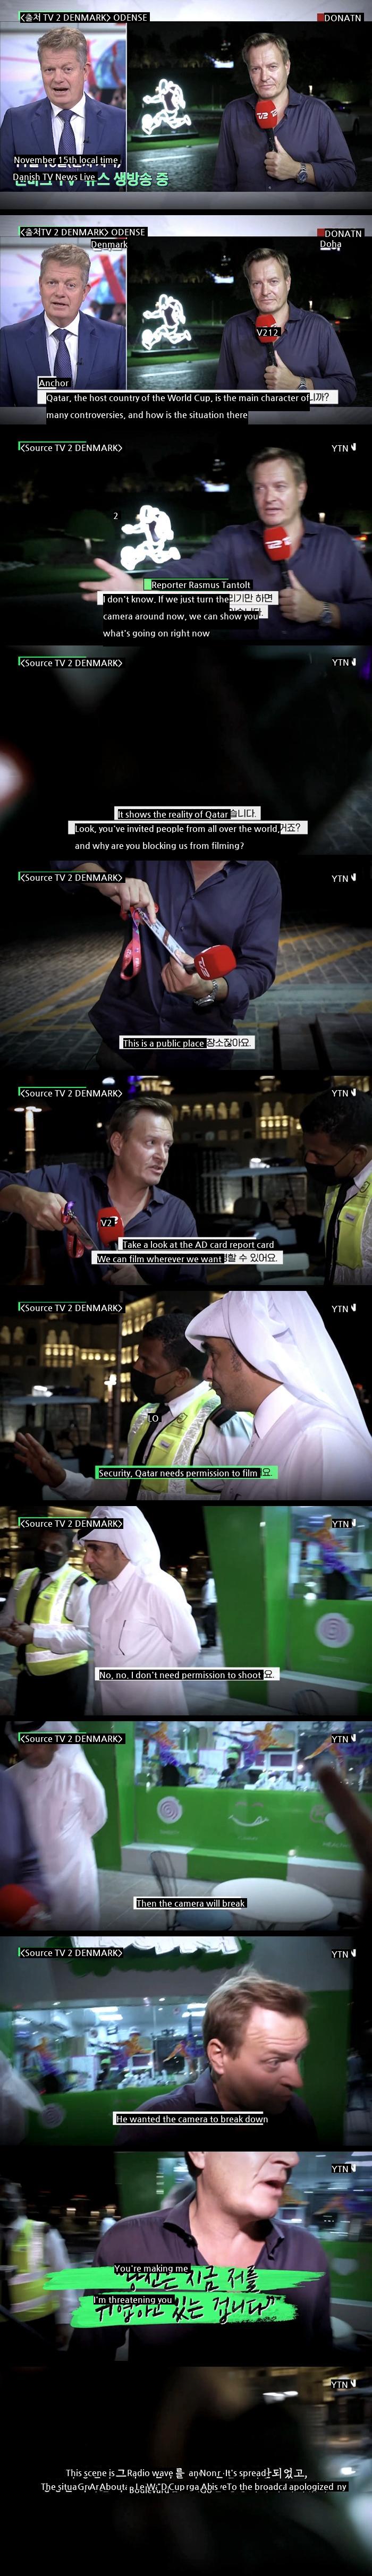 Qatar's situation during the live broadcast